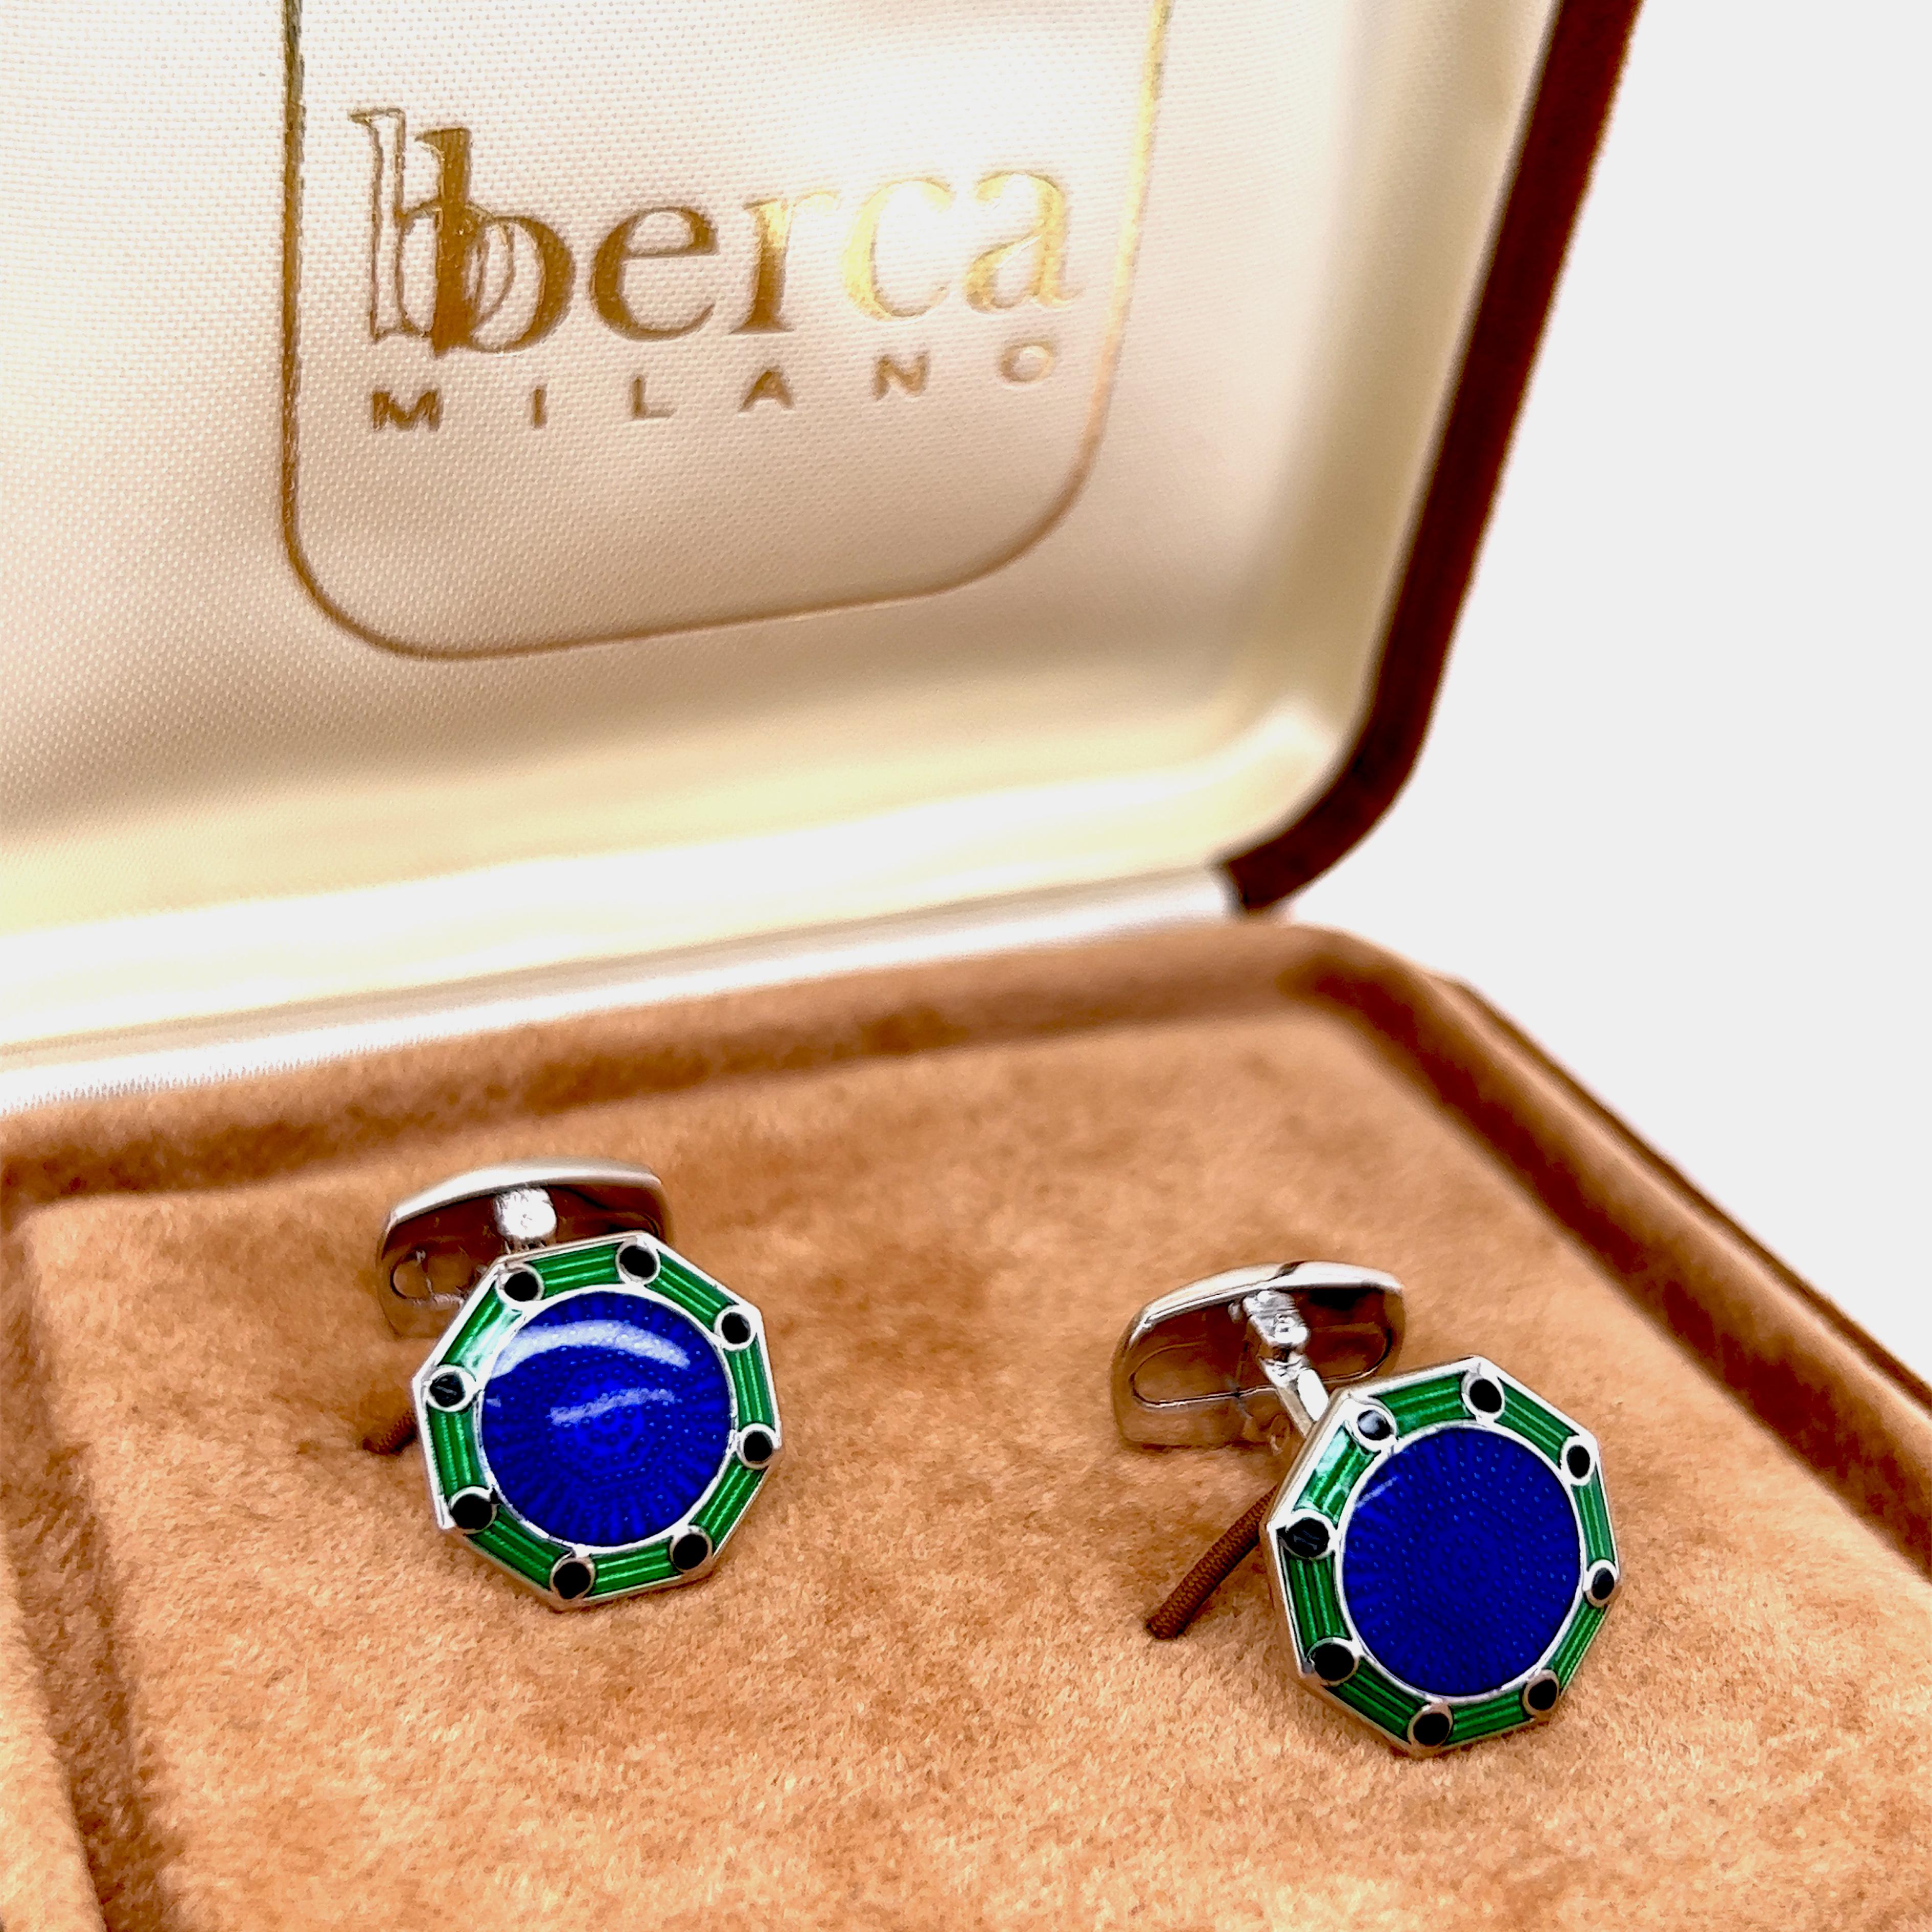 Berca Octagonal Navy Blue Green Enameled Sterling Silver Cufflinks T-Bar Back In New Condition For Sale In Valenza, IT